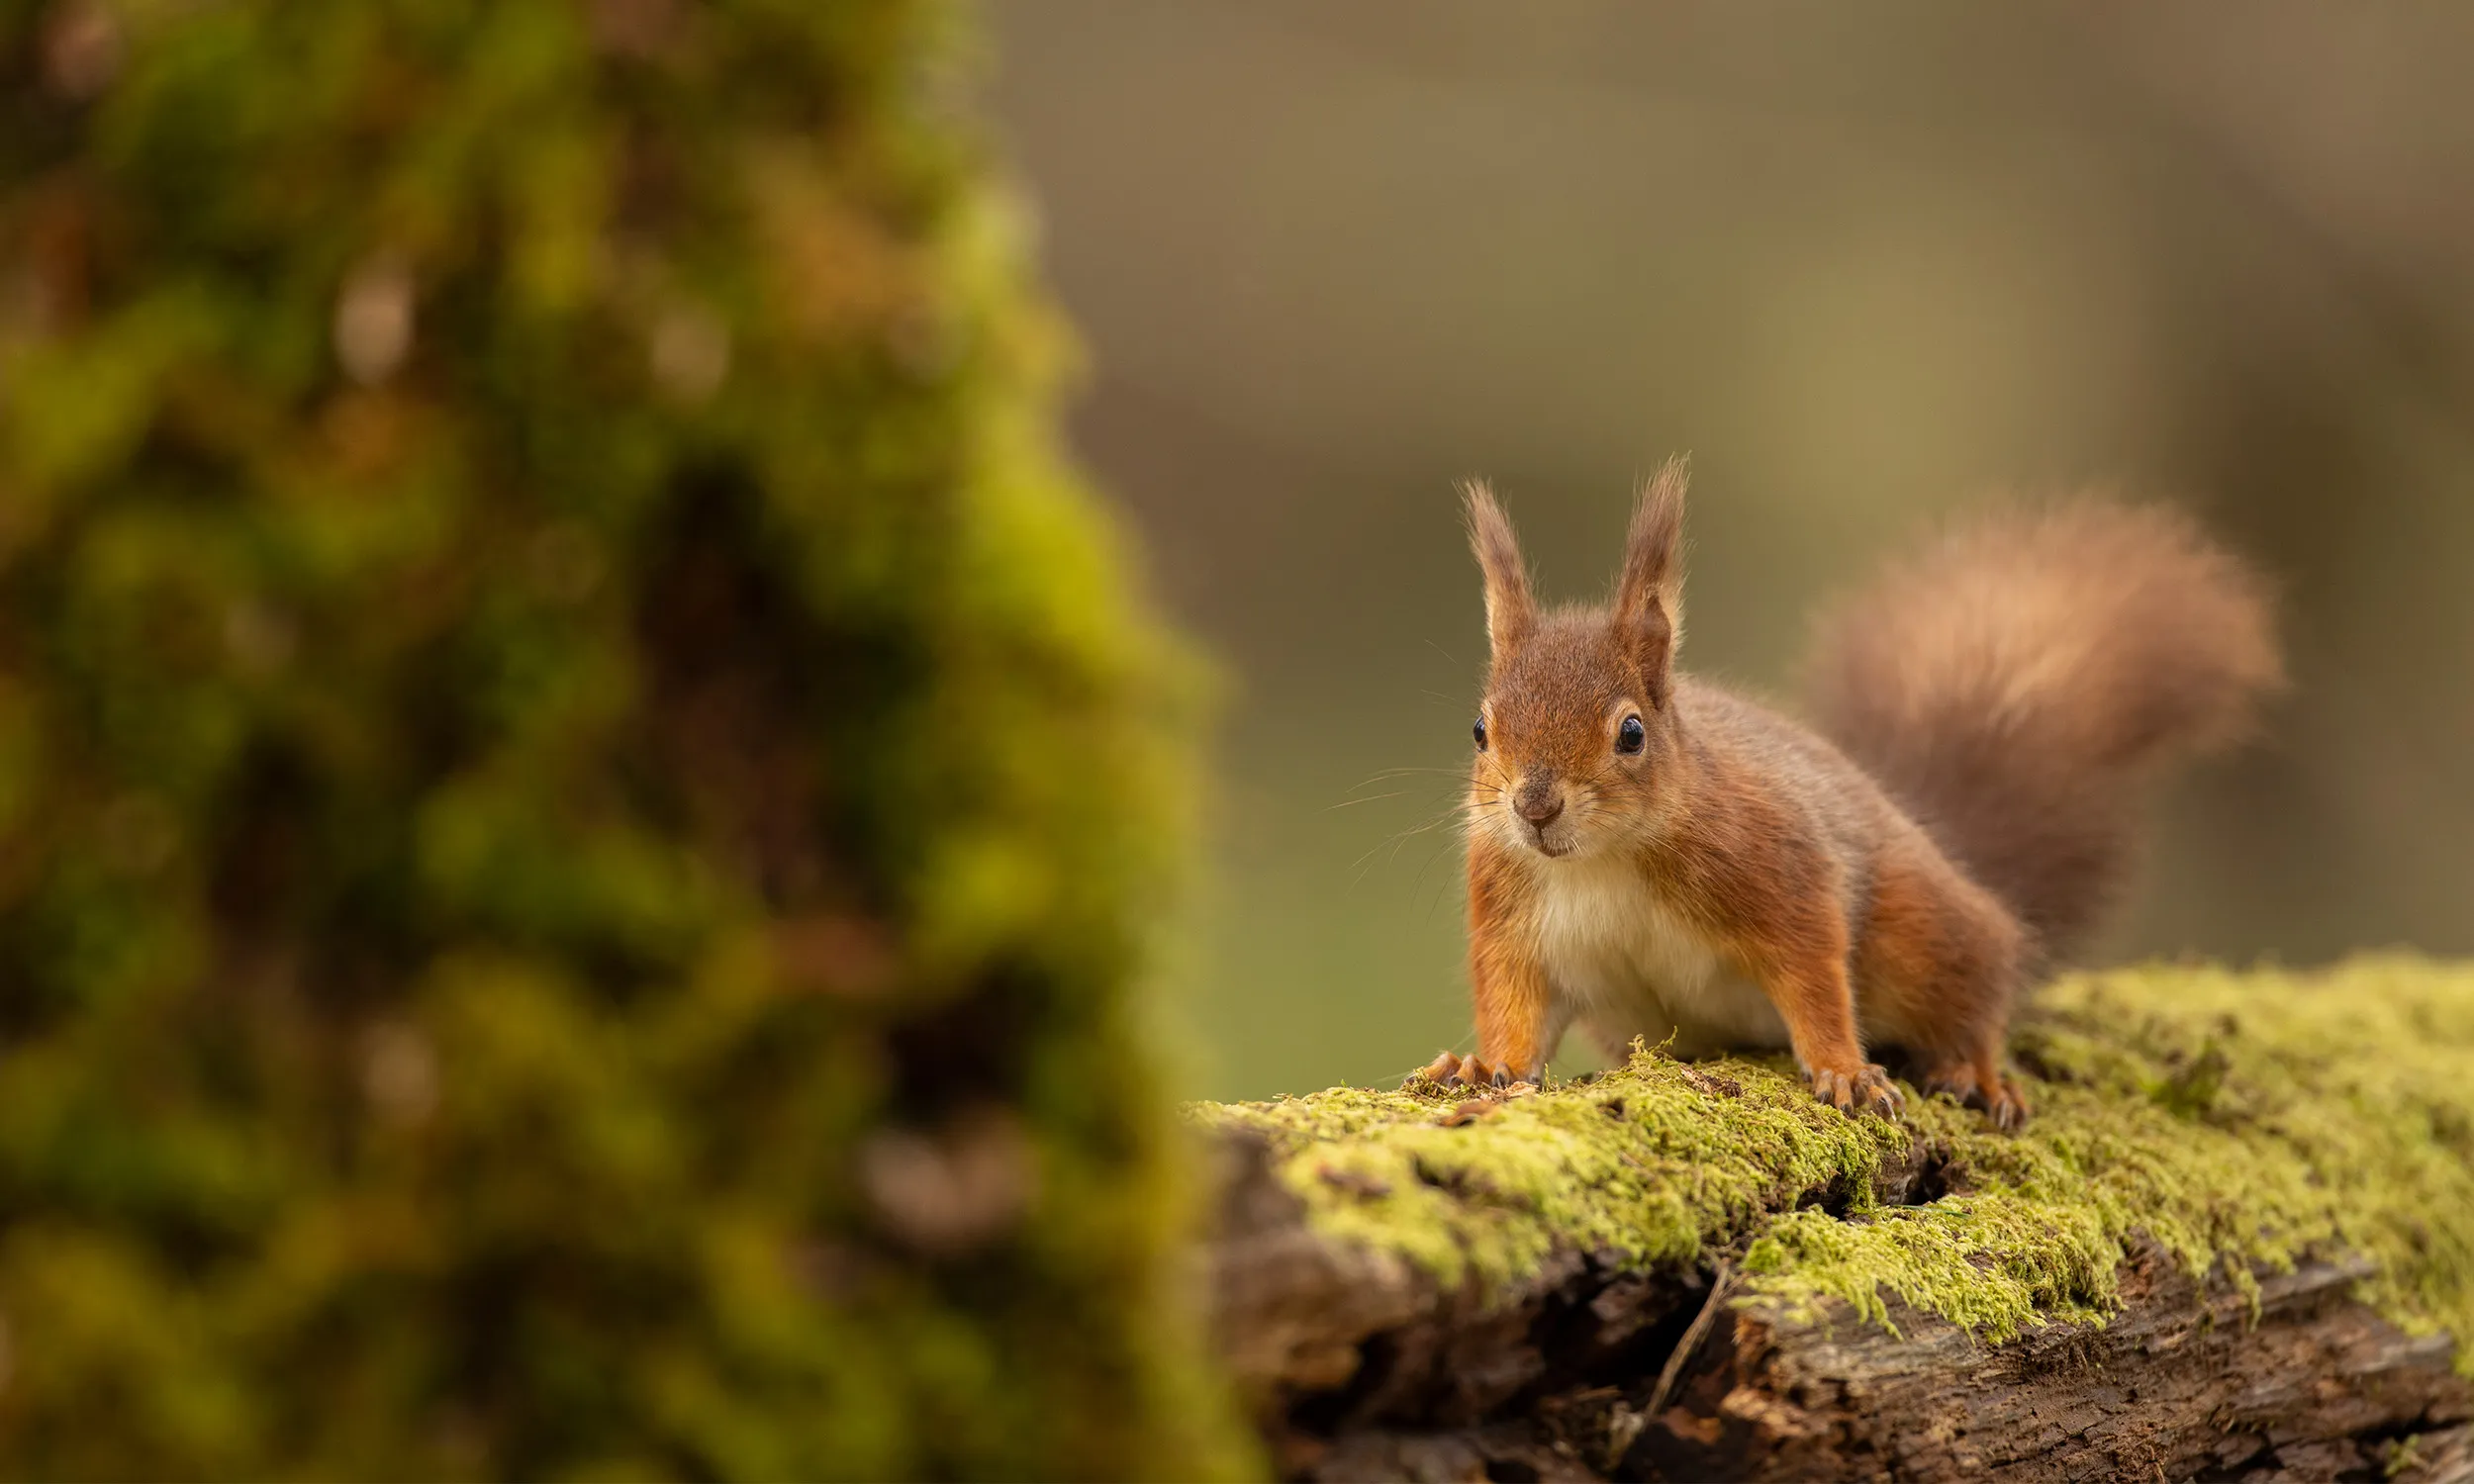 A Red Squirrel standing on a moss covered log.